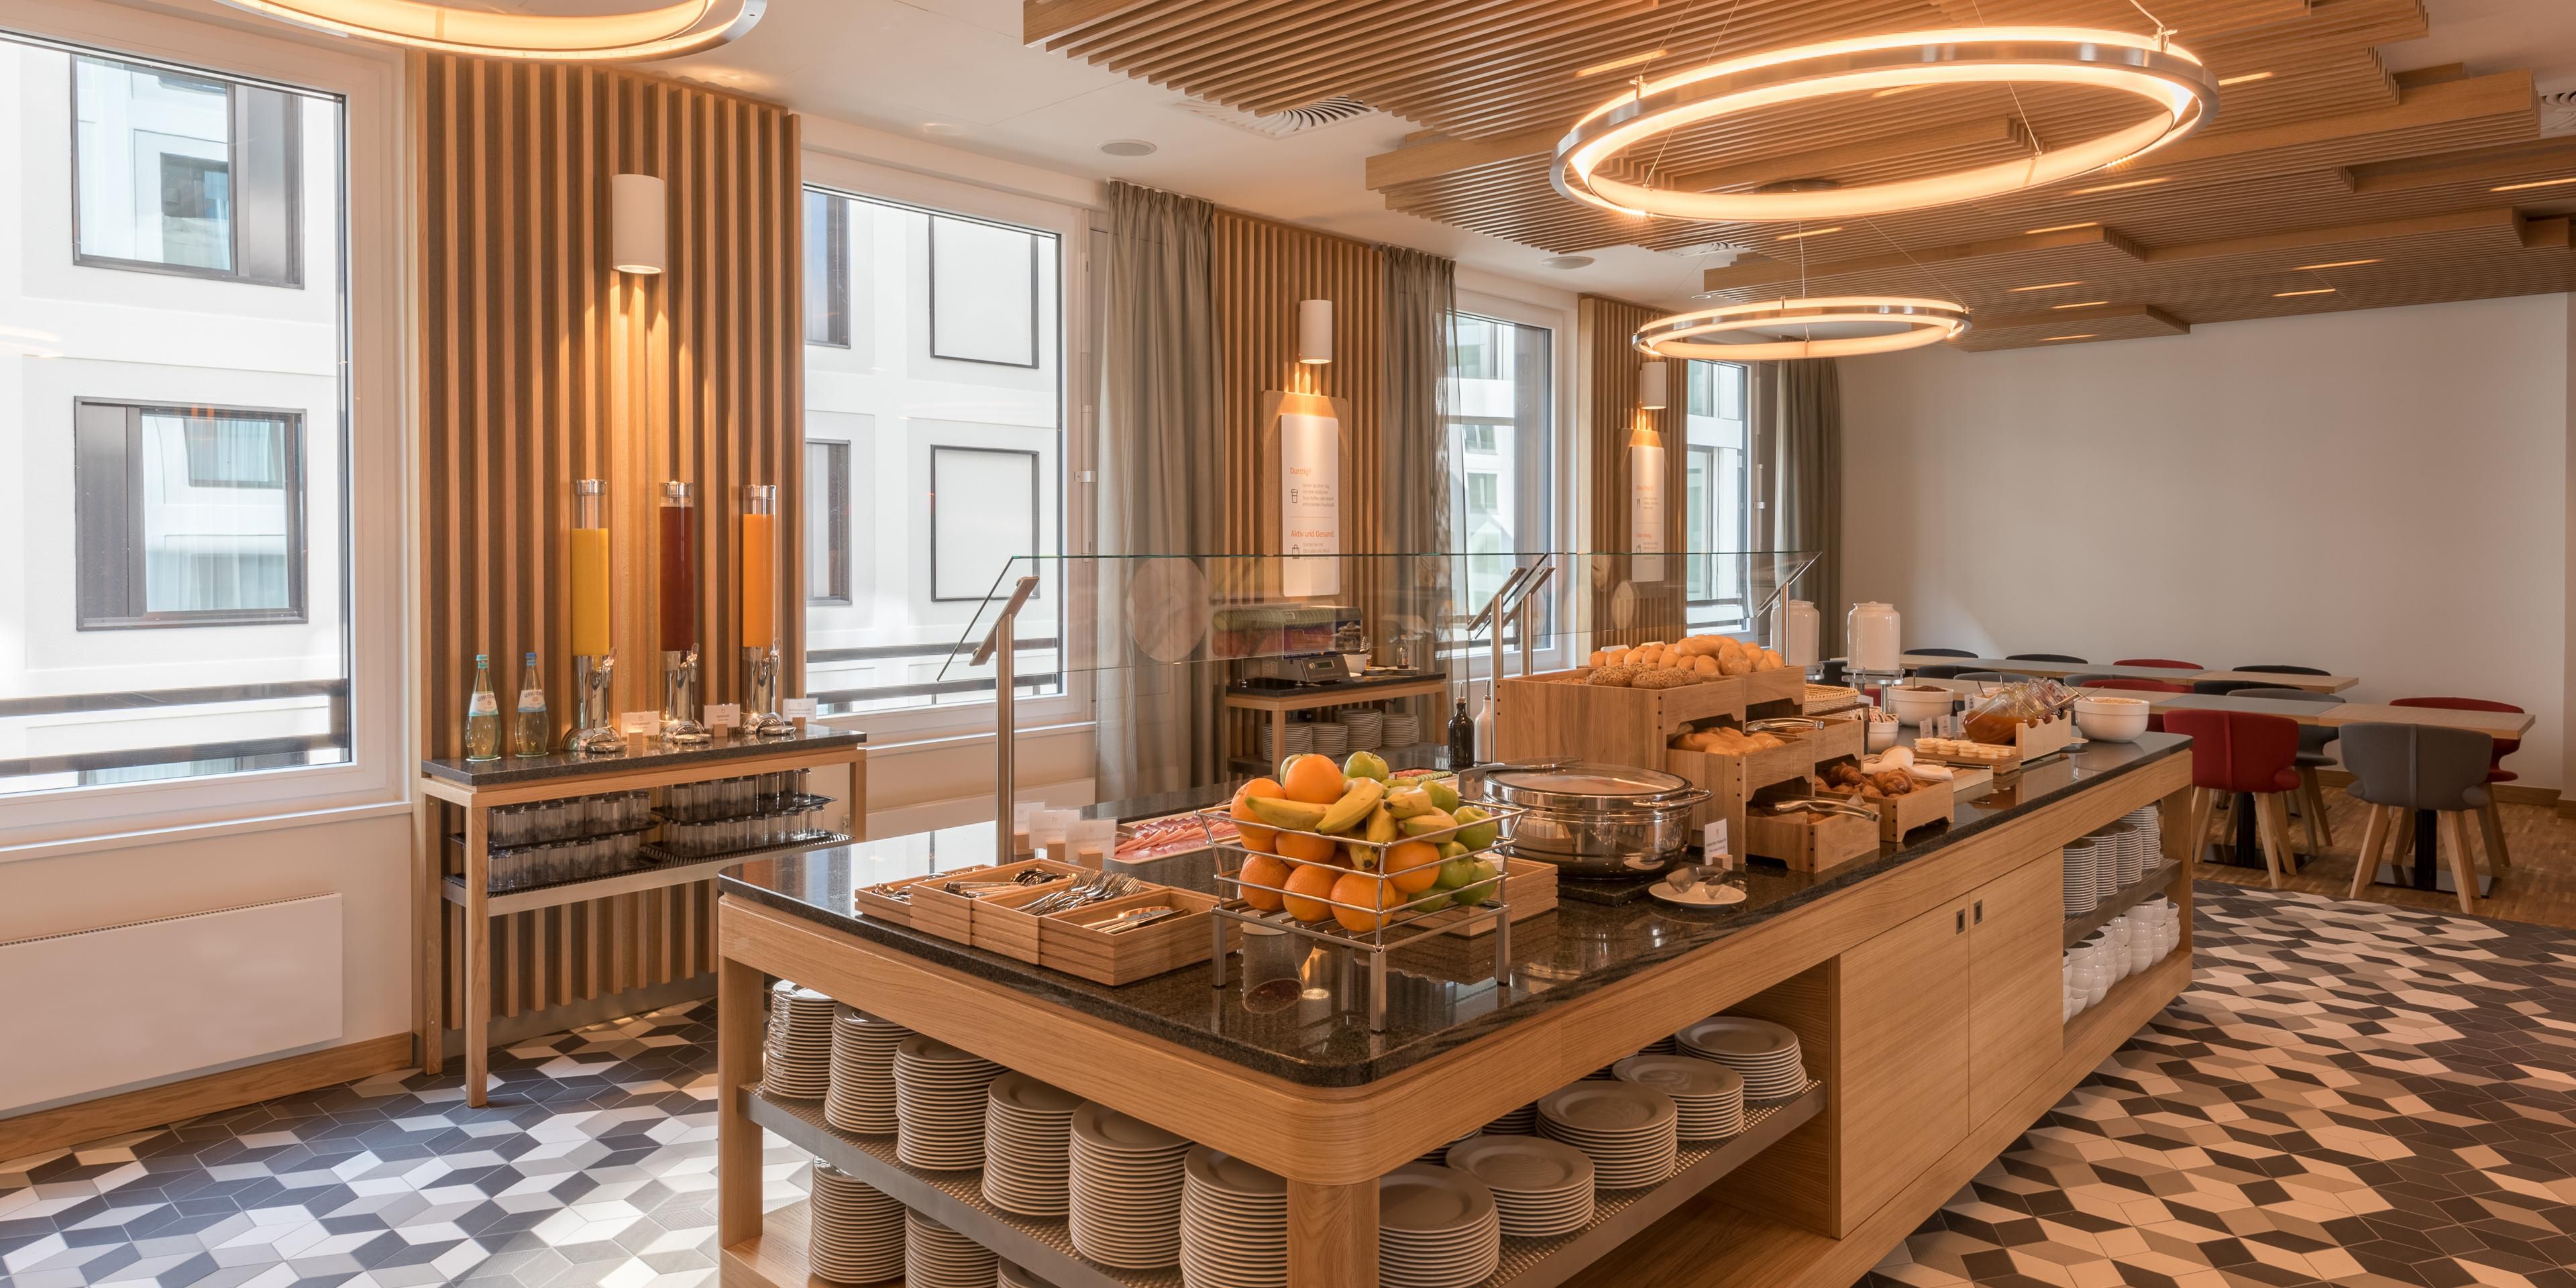 We understand that breakfast is the most important meal of the day. Therefore, we offer happy mornings with complimentary healthy breakfast served every day to you. Enjoy the continental Express Start™ Breakfast buffet before you head out to explore the city.
